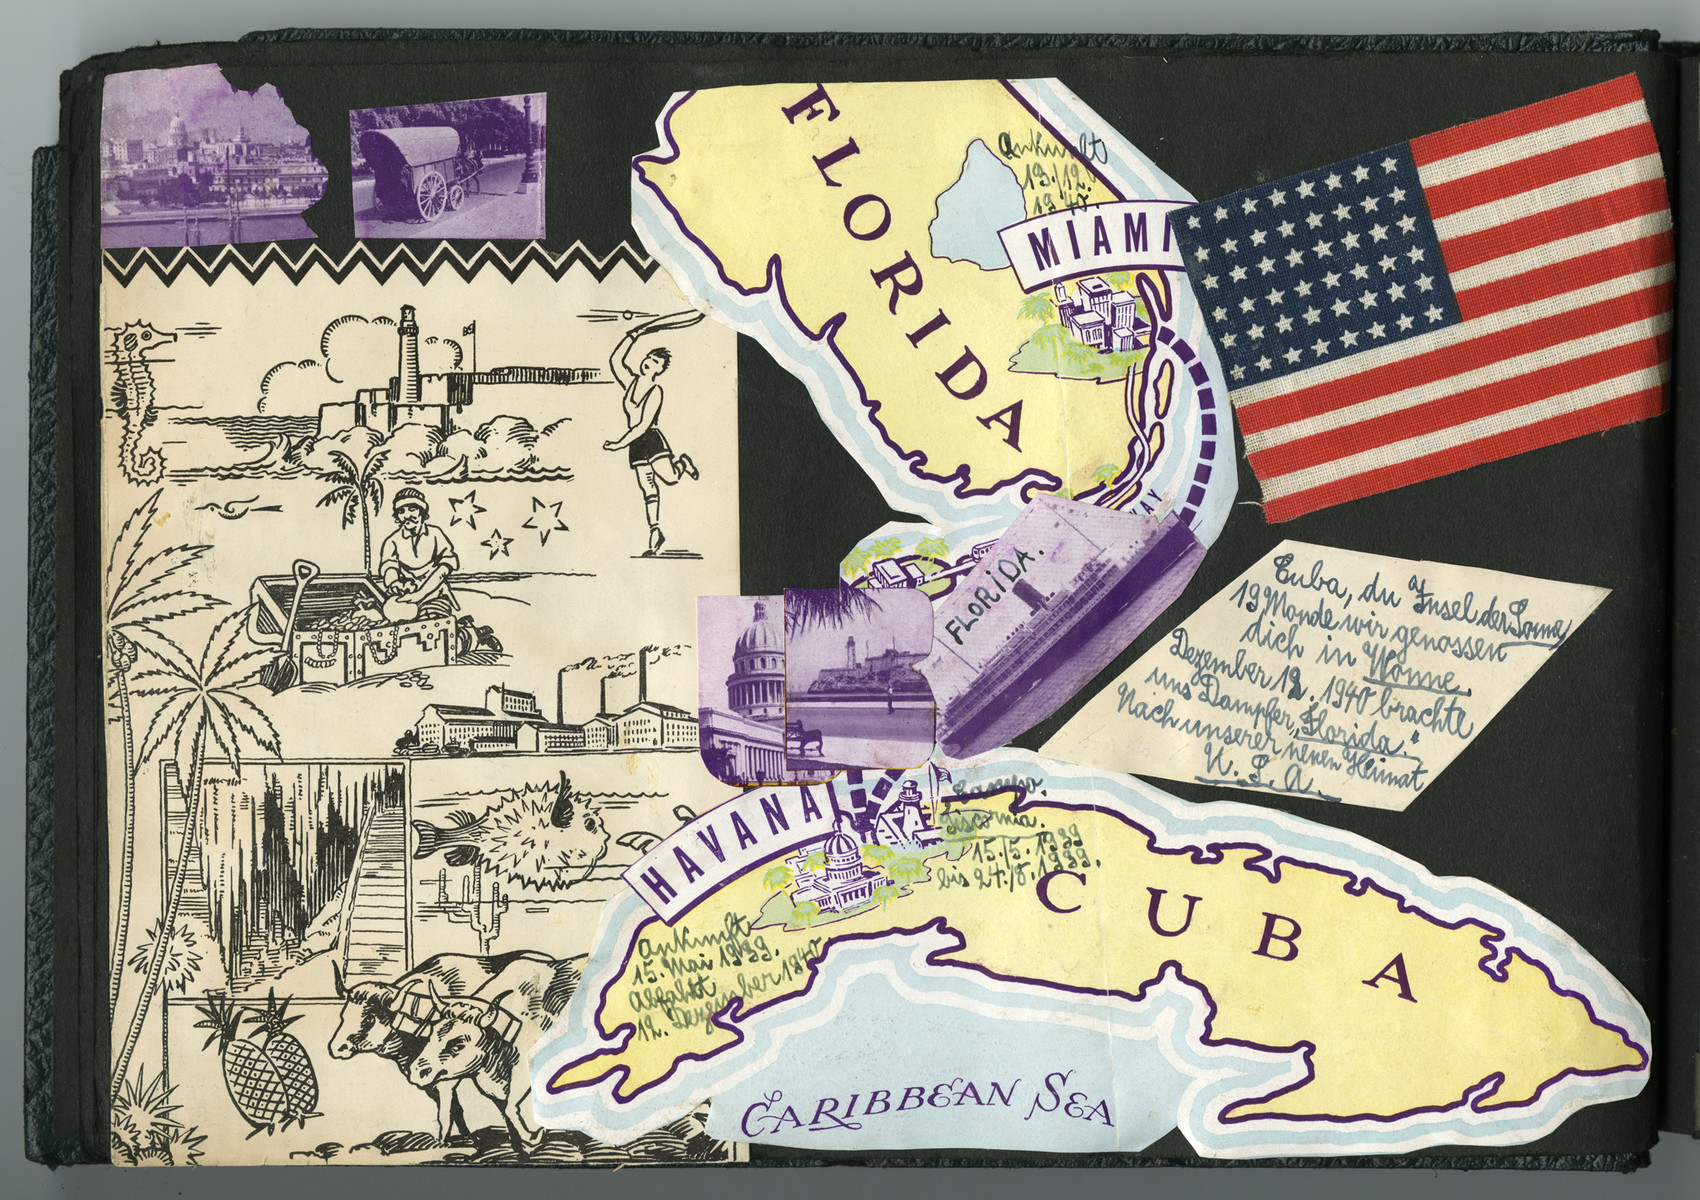 A page from a scrapbook with prictures of Cuba and Florida.